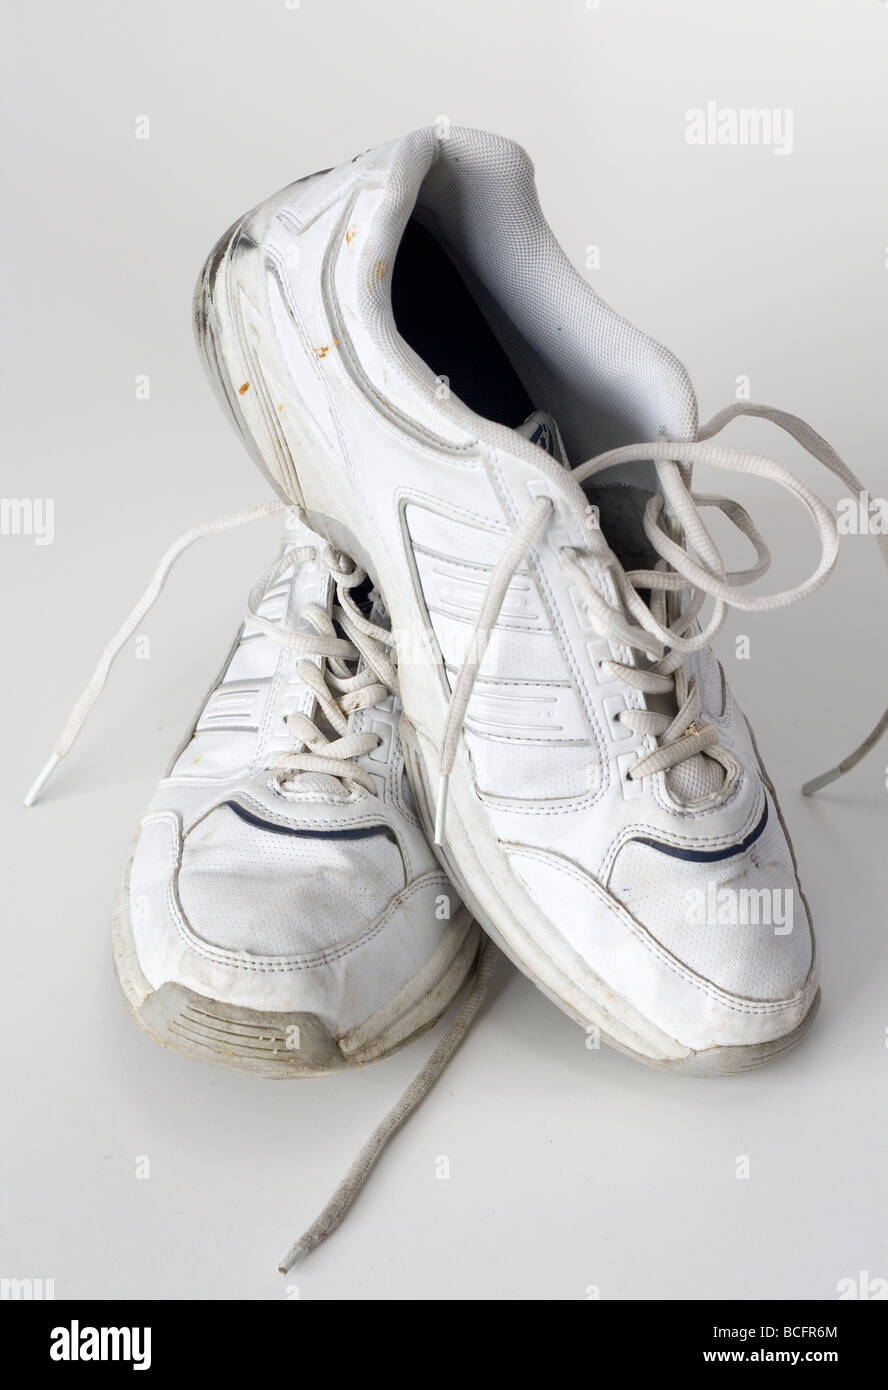 A pair of white tennis shoes Stock Photo